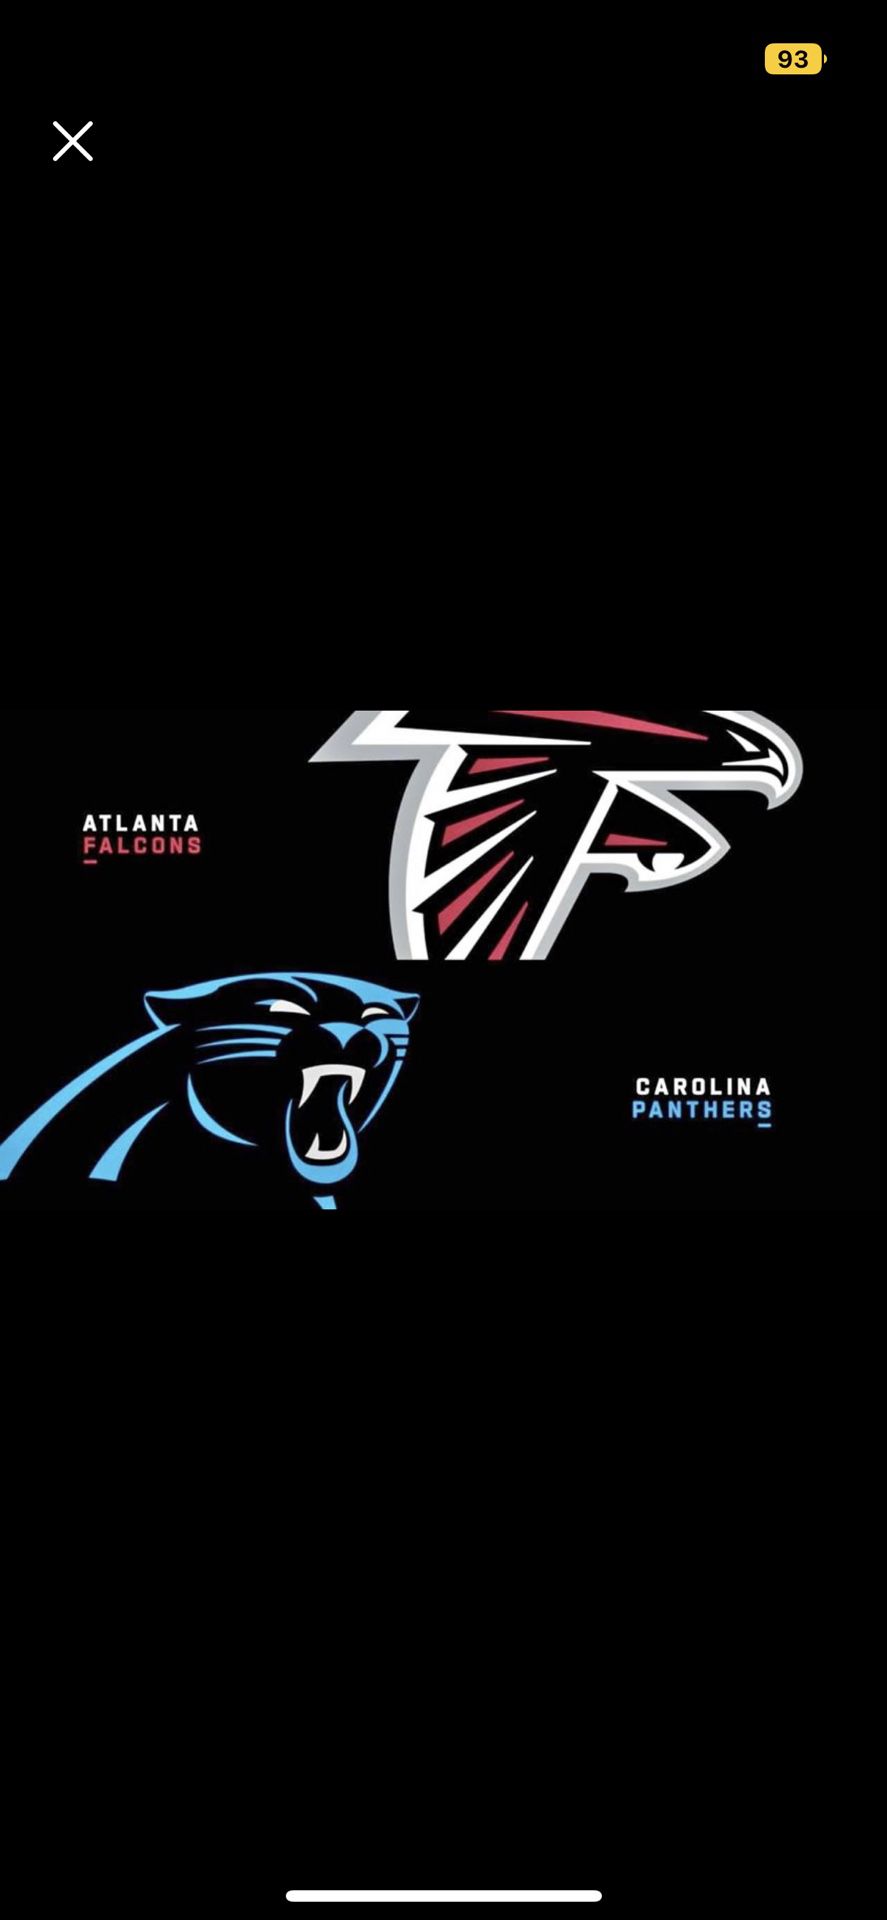 Panthers vd Falcons Tickets 